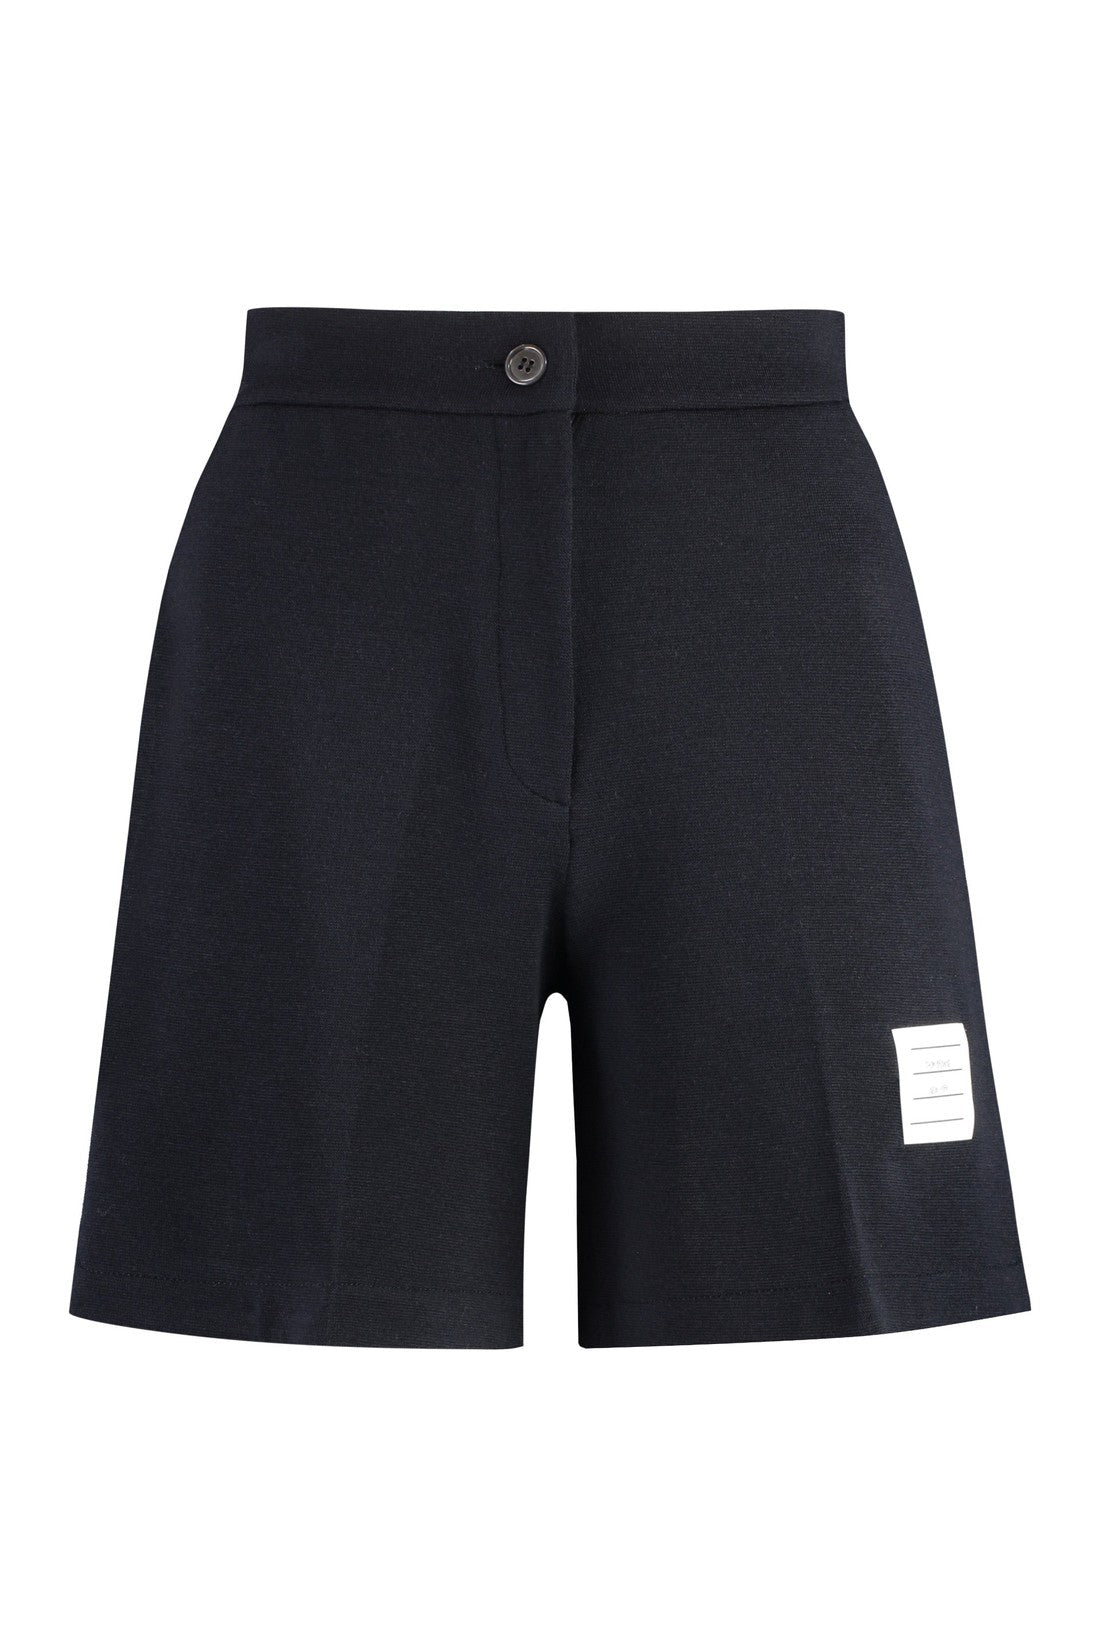 Thom Browne-OUTLET-SALE-Wool shorts-ARCHIVIST